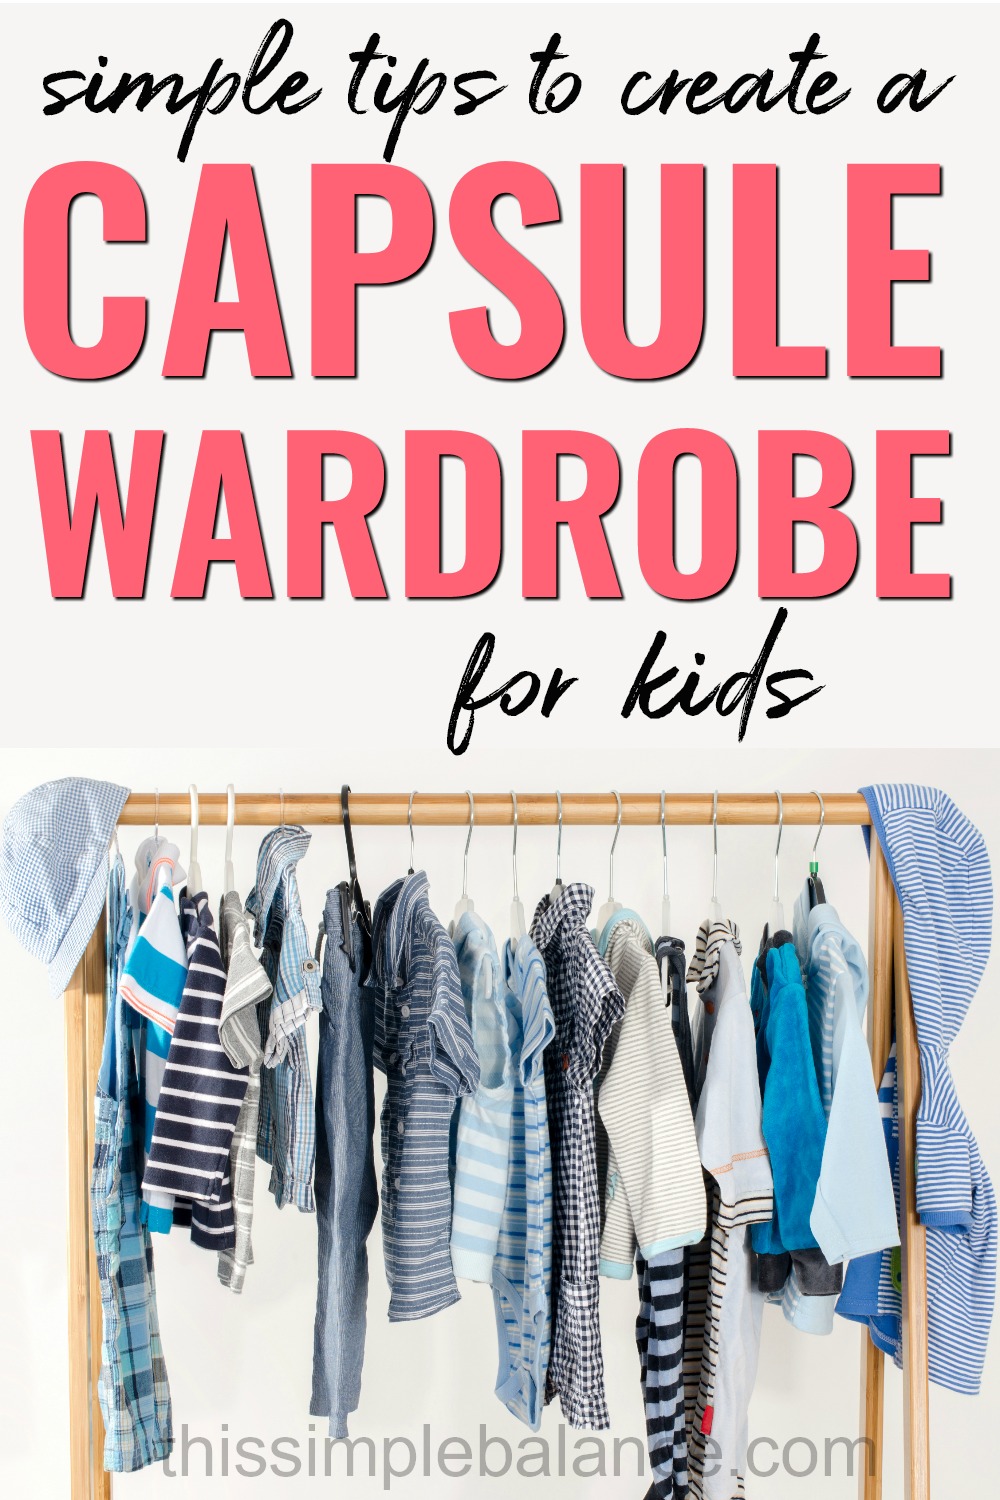 7 Tips to Build a Capsule Wardrobe for Kids on a Budget | This Simple ...